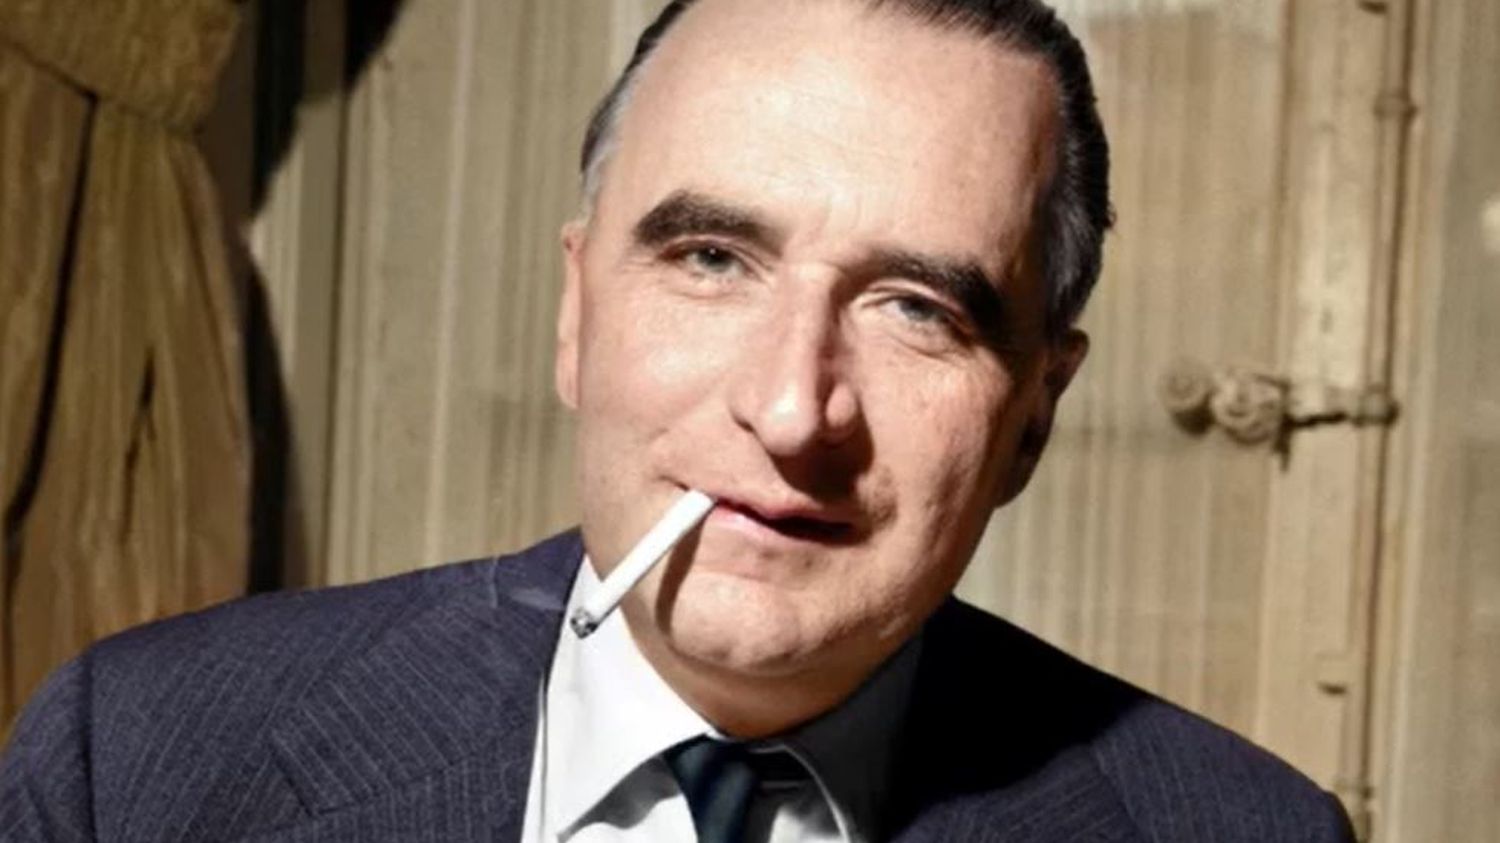 VIDEO.  When Georges Pompidou had to face rumors and hide his illness